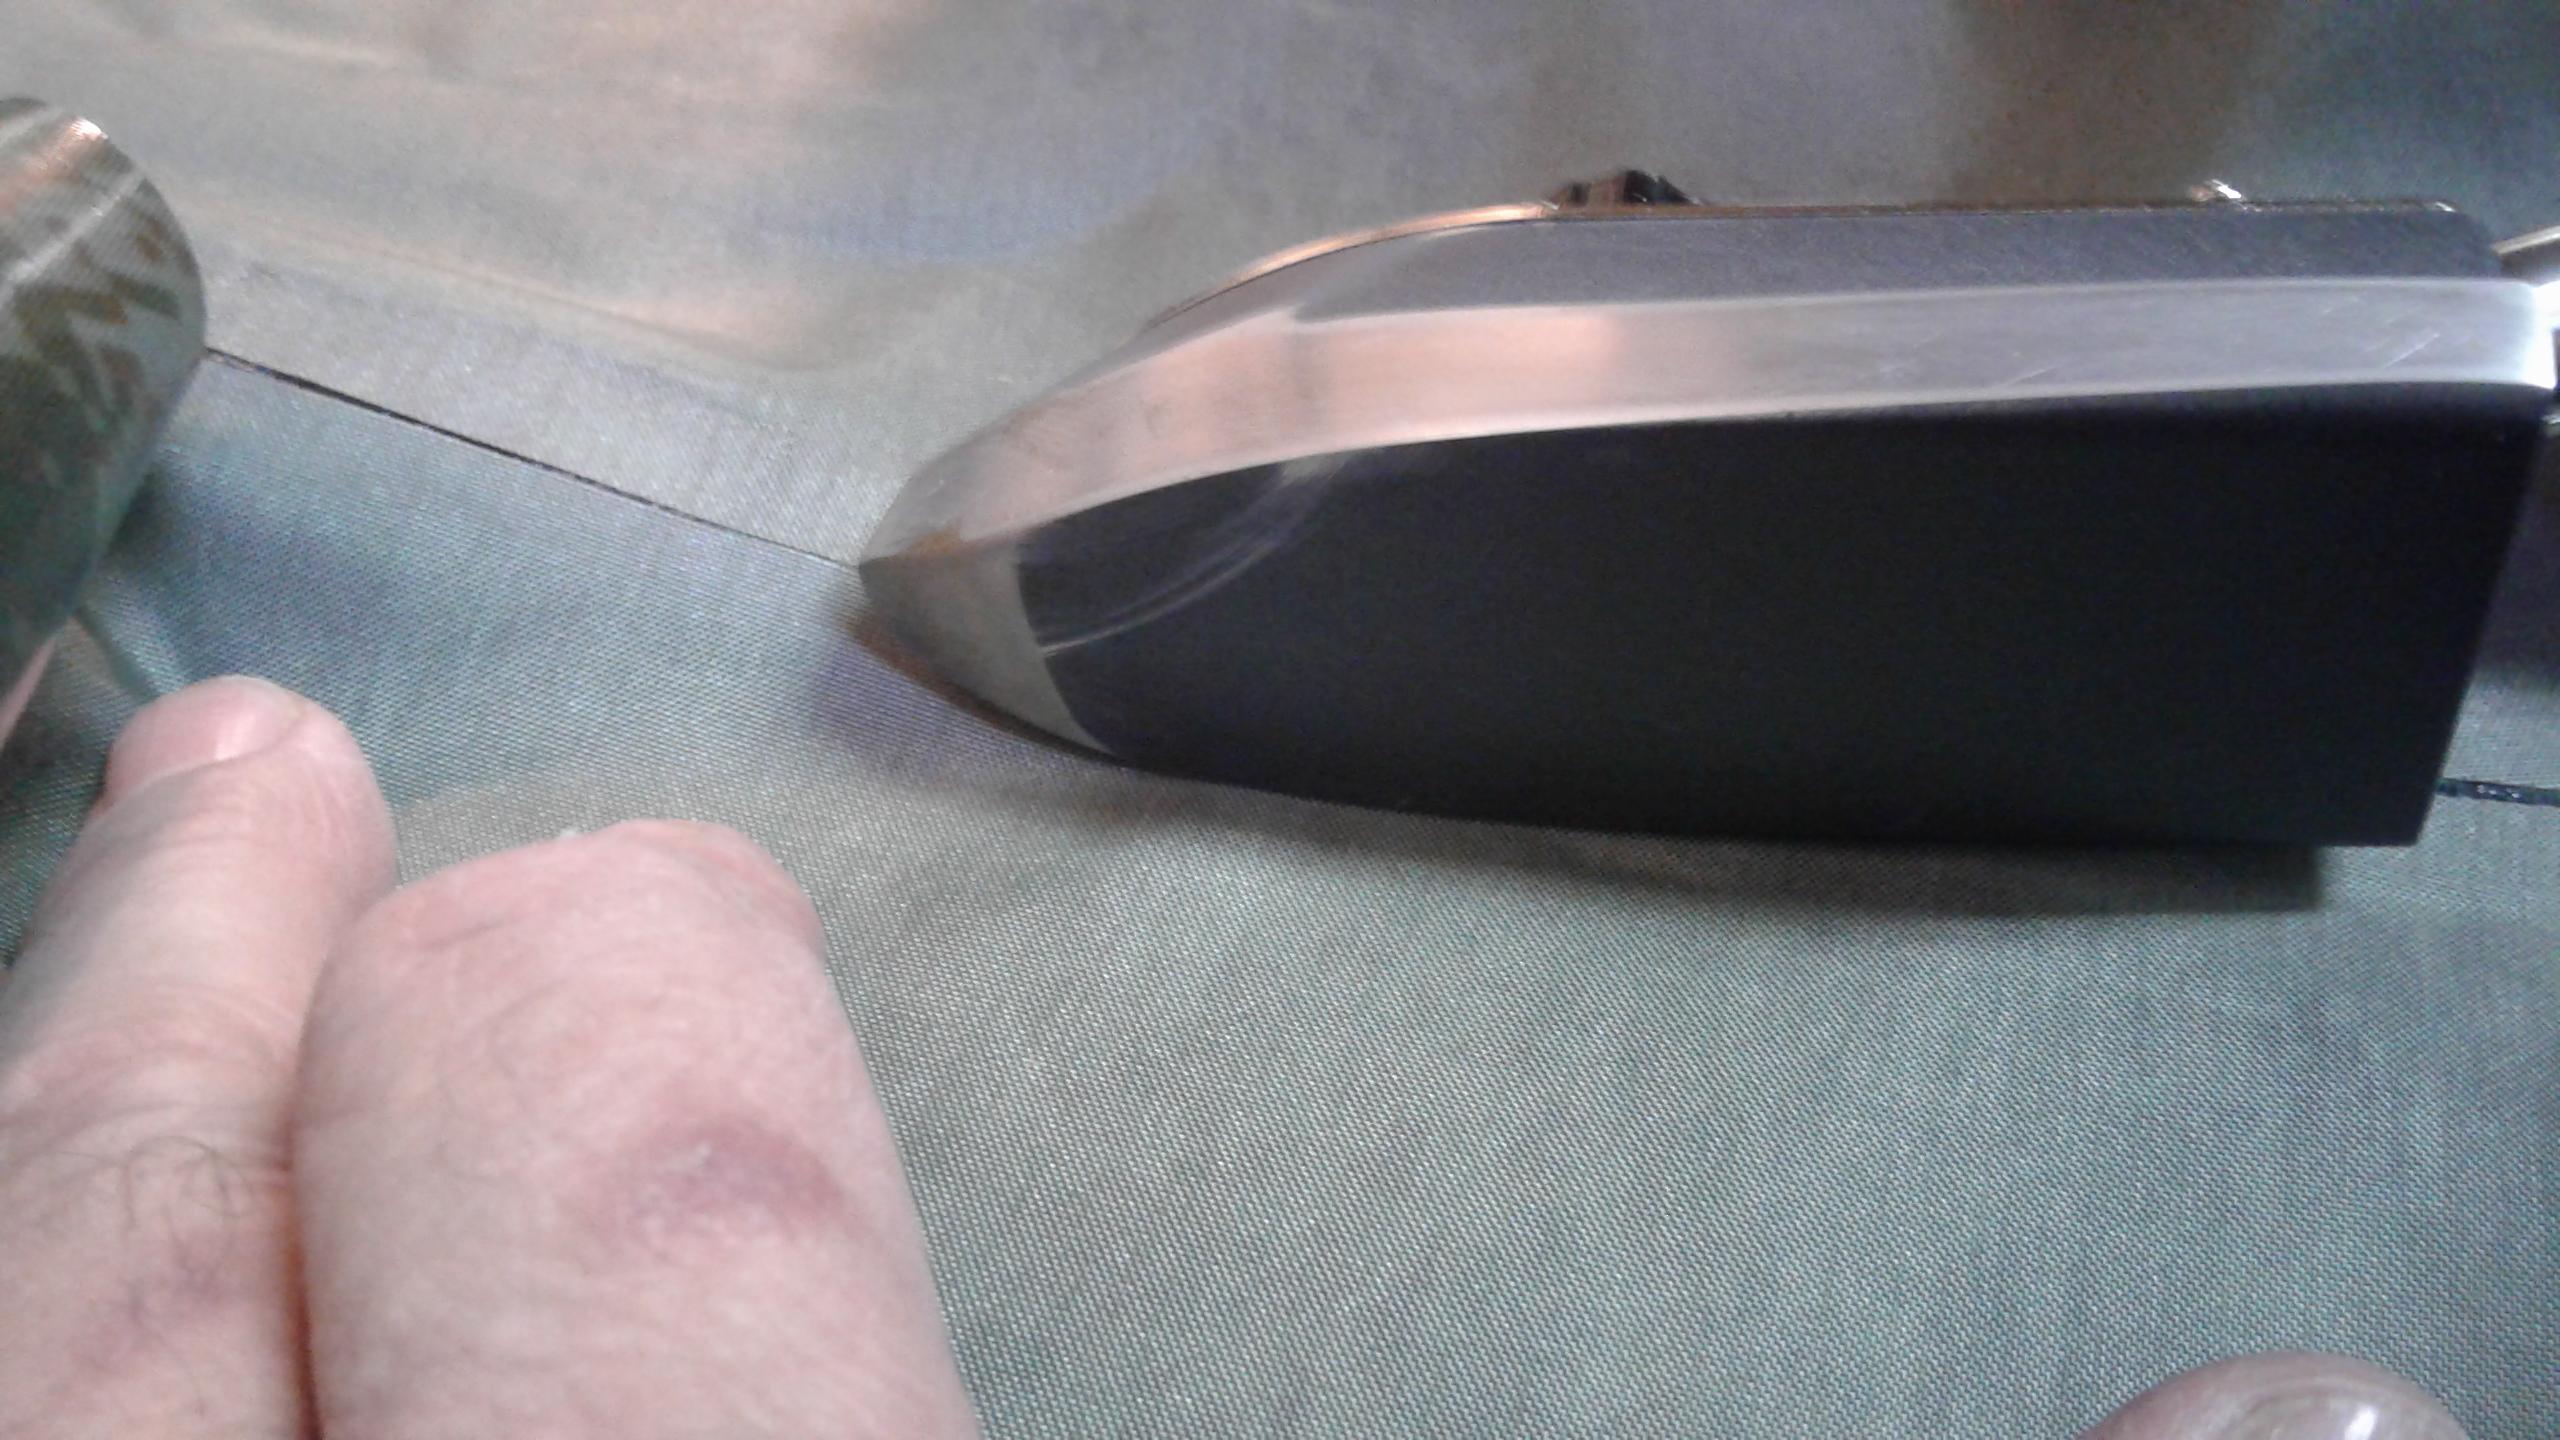 Flat side is sealing the inside of a seam.